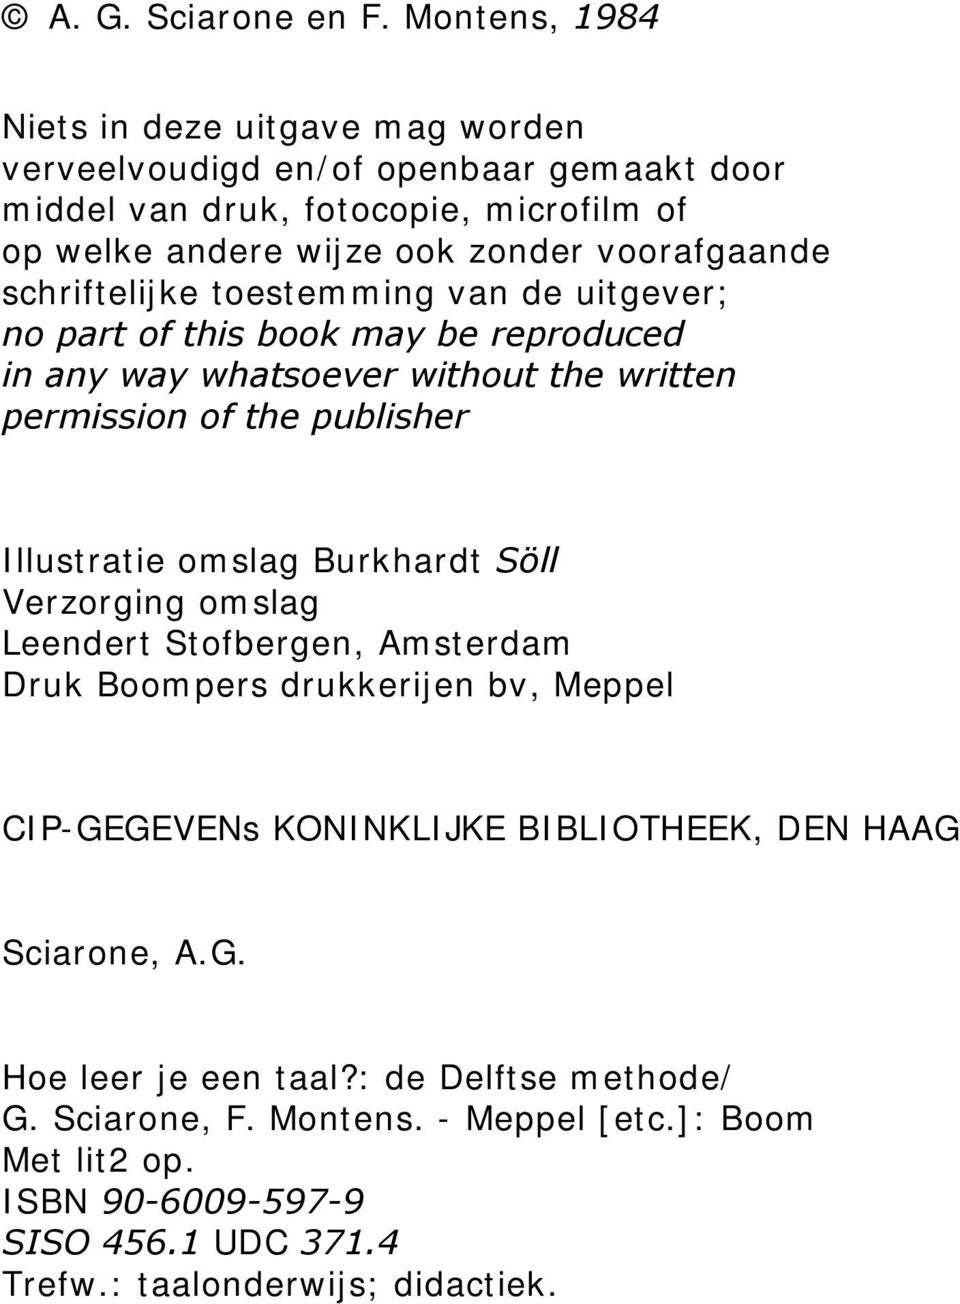 schriftelijke toestemming van de uitgever; no part of this book may be reproduced in any way whatsoever without the written permission of the publisher Illustratie omslag